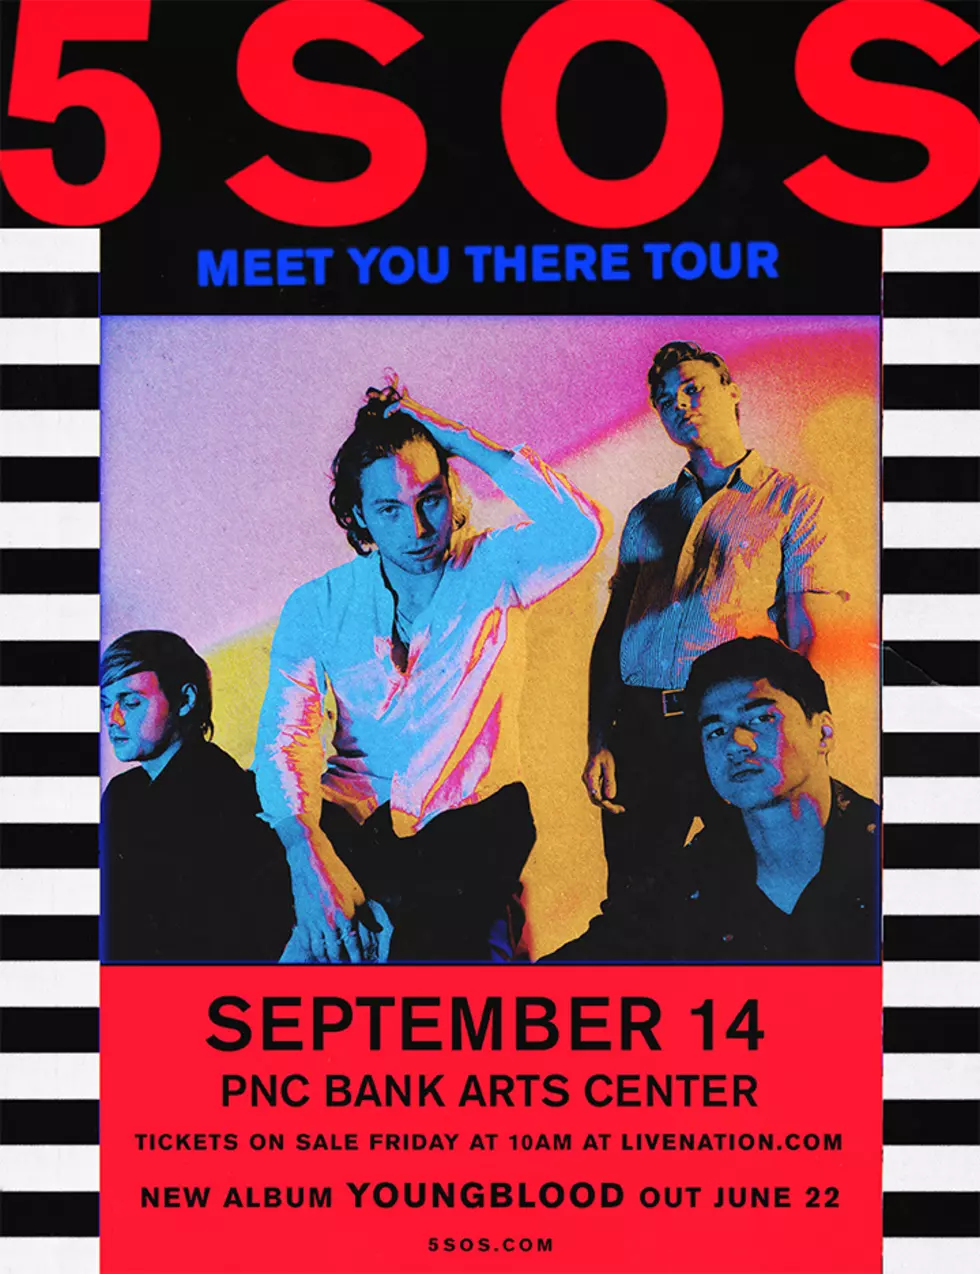 5SOS “Meet You There Tour” Hits MICHIGAN & We’ve Got Tickets!